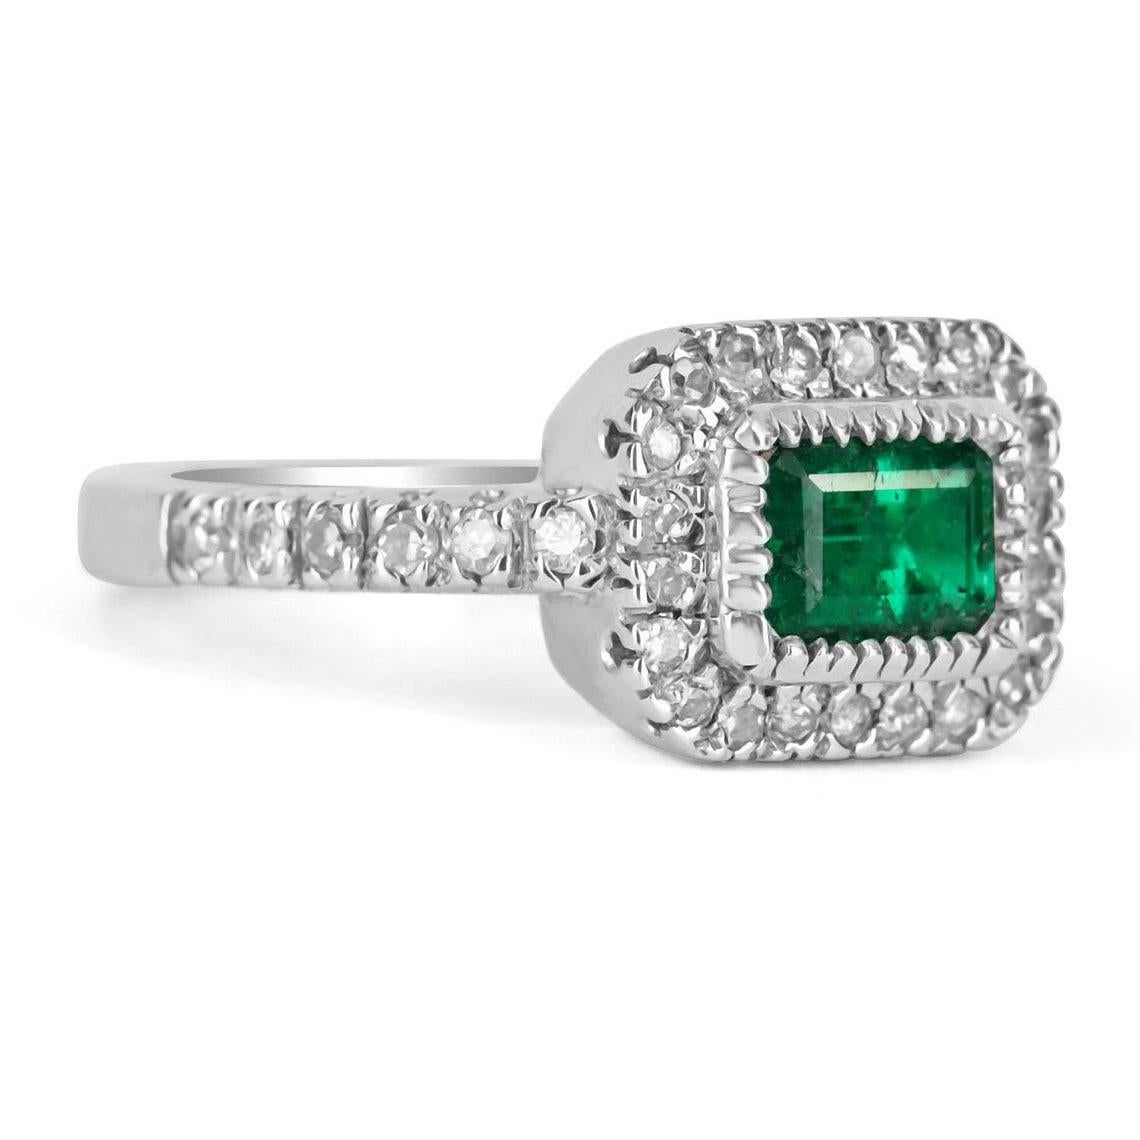 This is an outstanding, top quality, dark green emerald cut Colombian Emerald and diamond ring. Created in 14k glistening white gold the enticing 1.15ct dark green emerald is side set and is surrounded by numerous 0.55pts diamonds that also follow